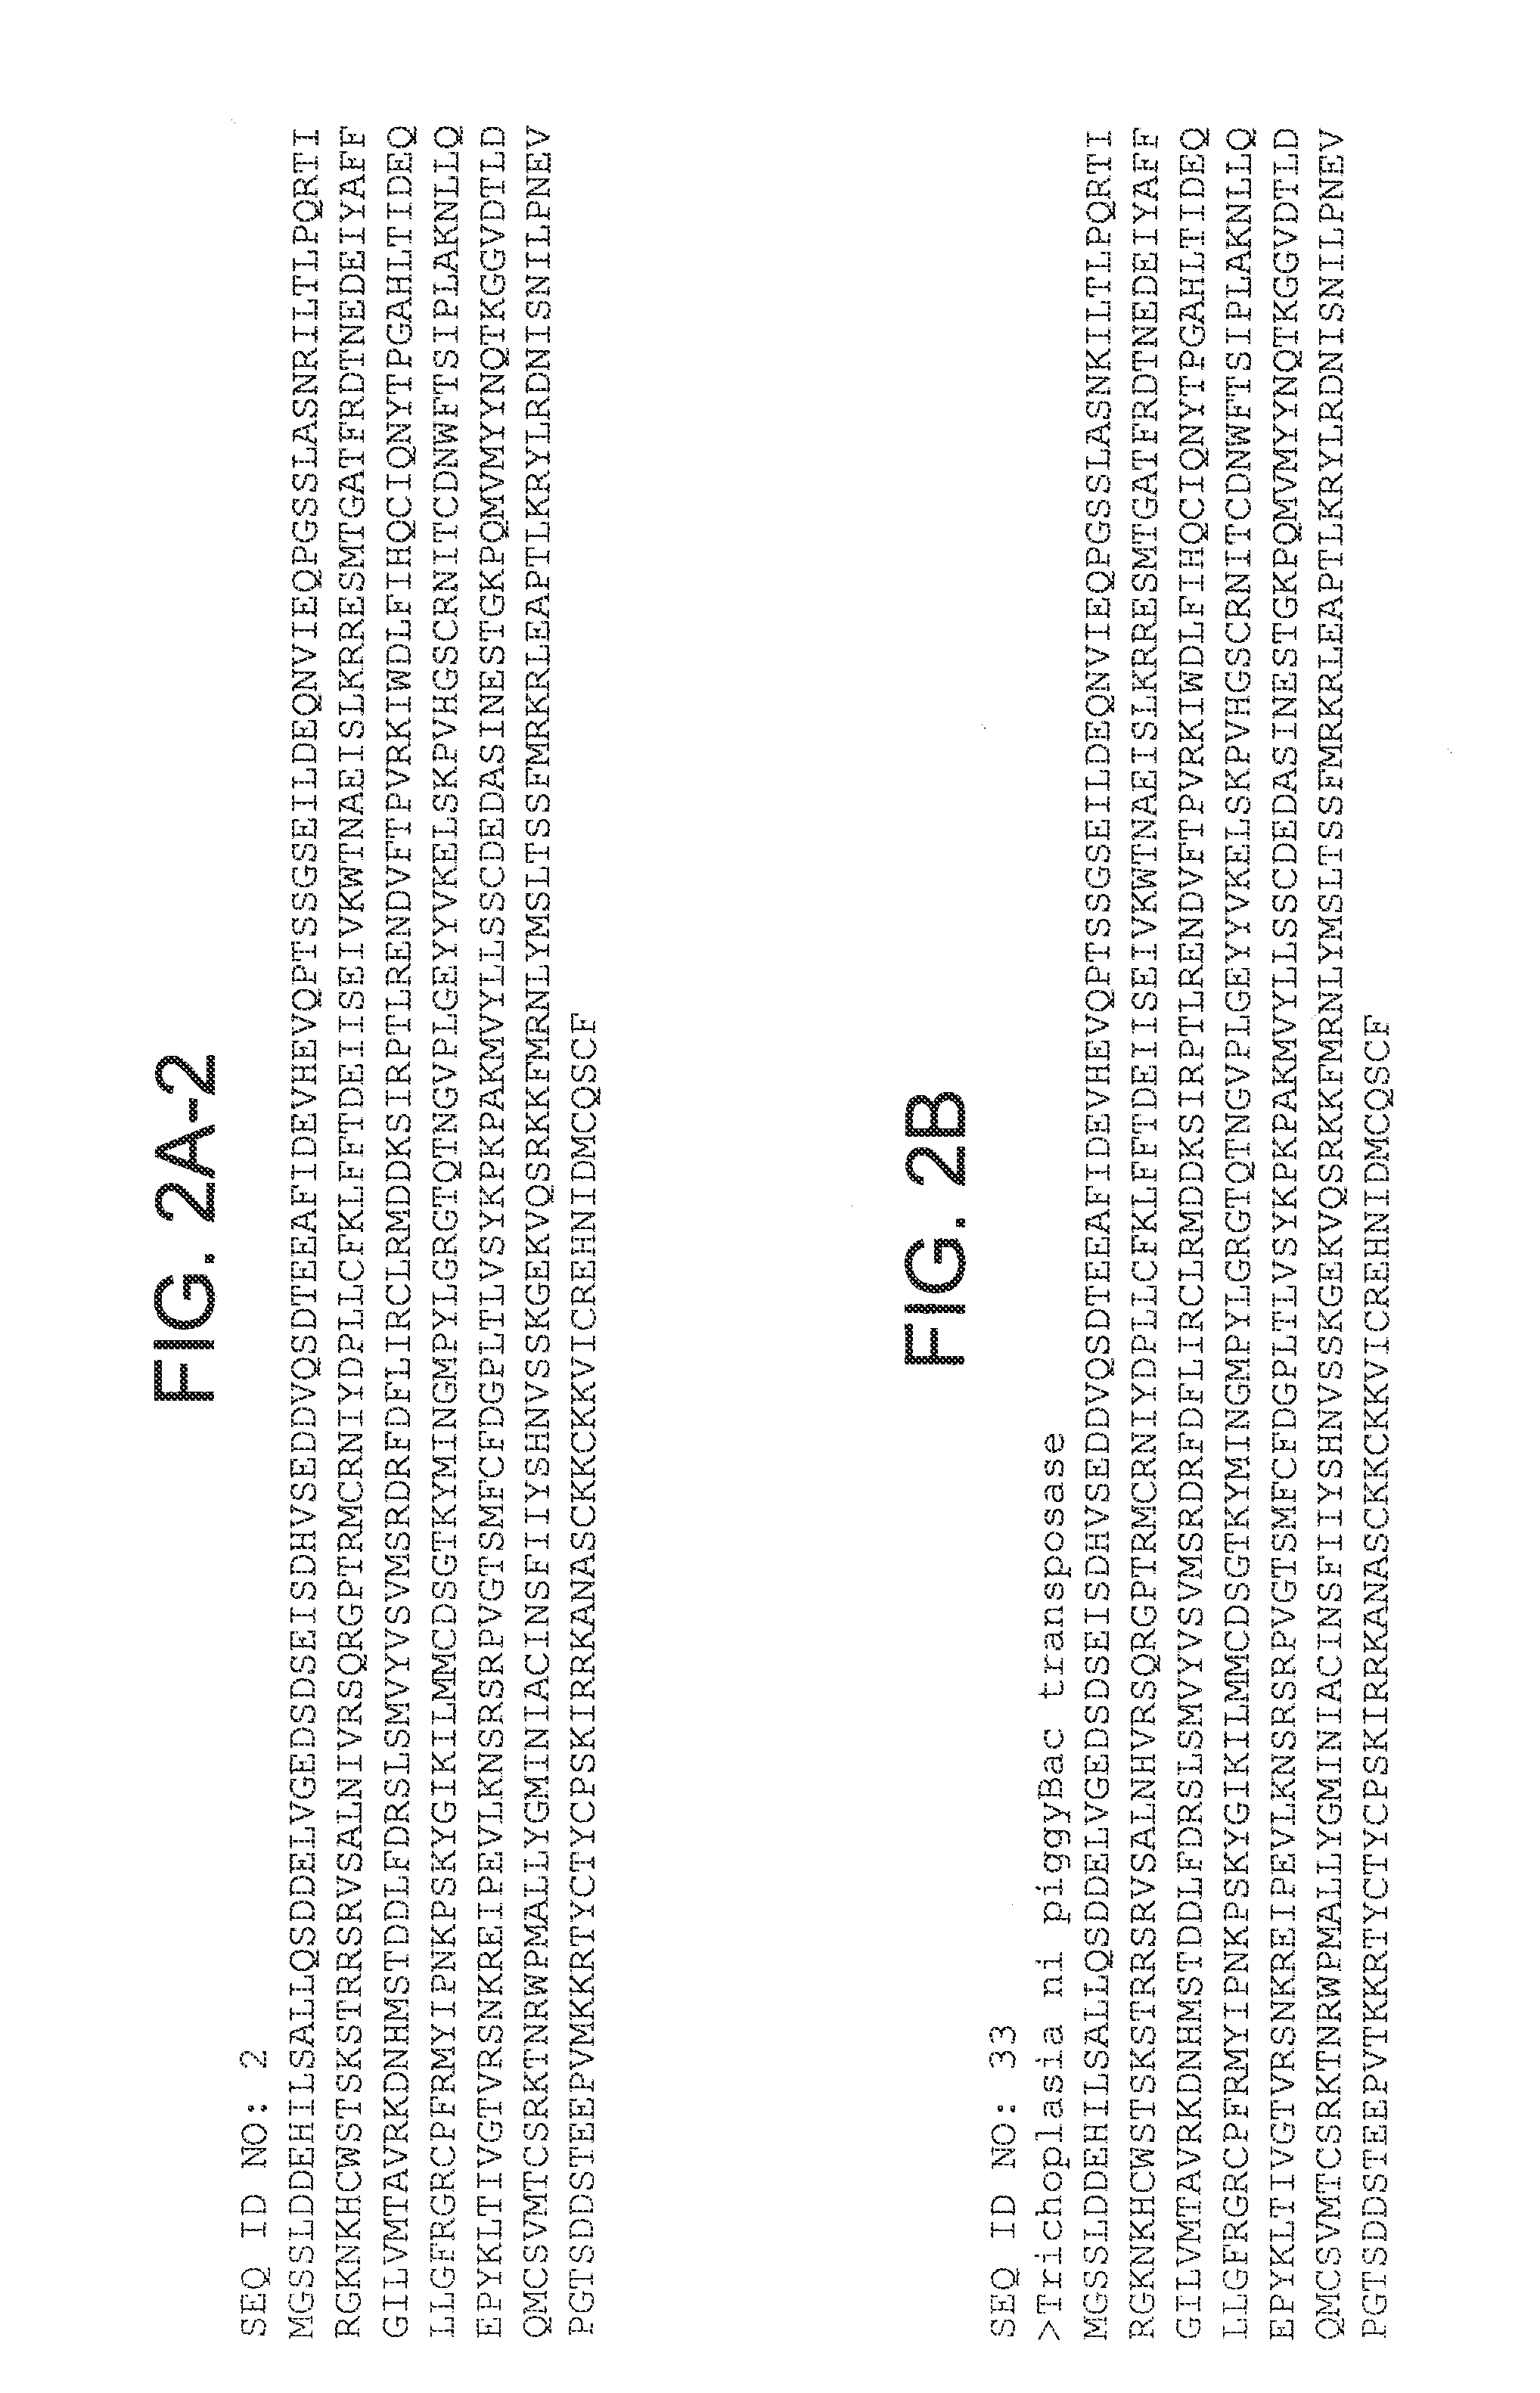 Piggybac transposon variants and methods of use